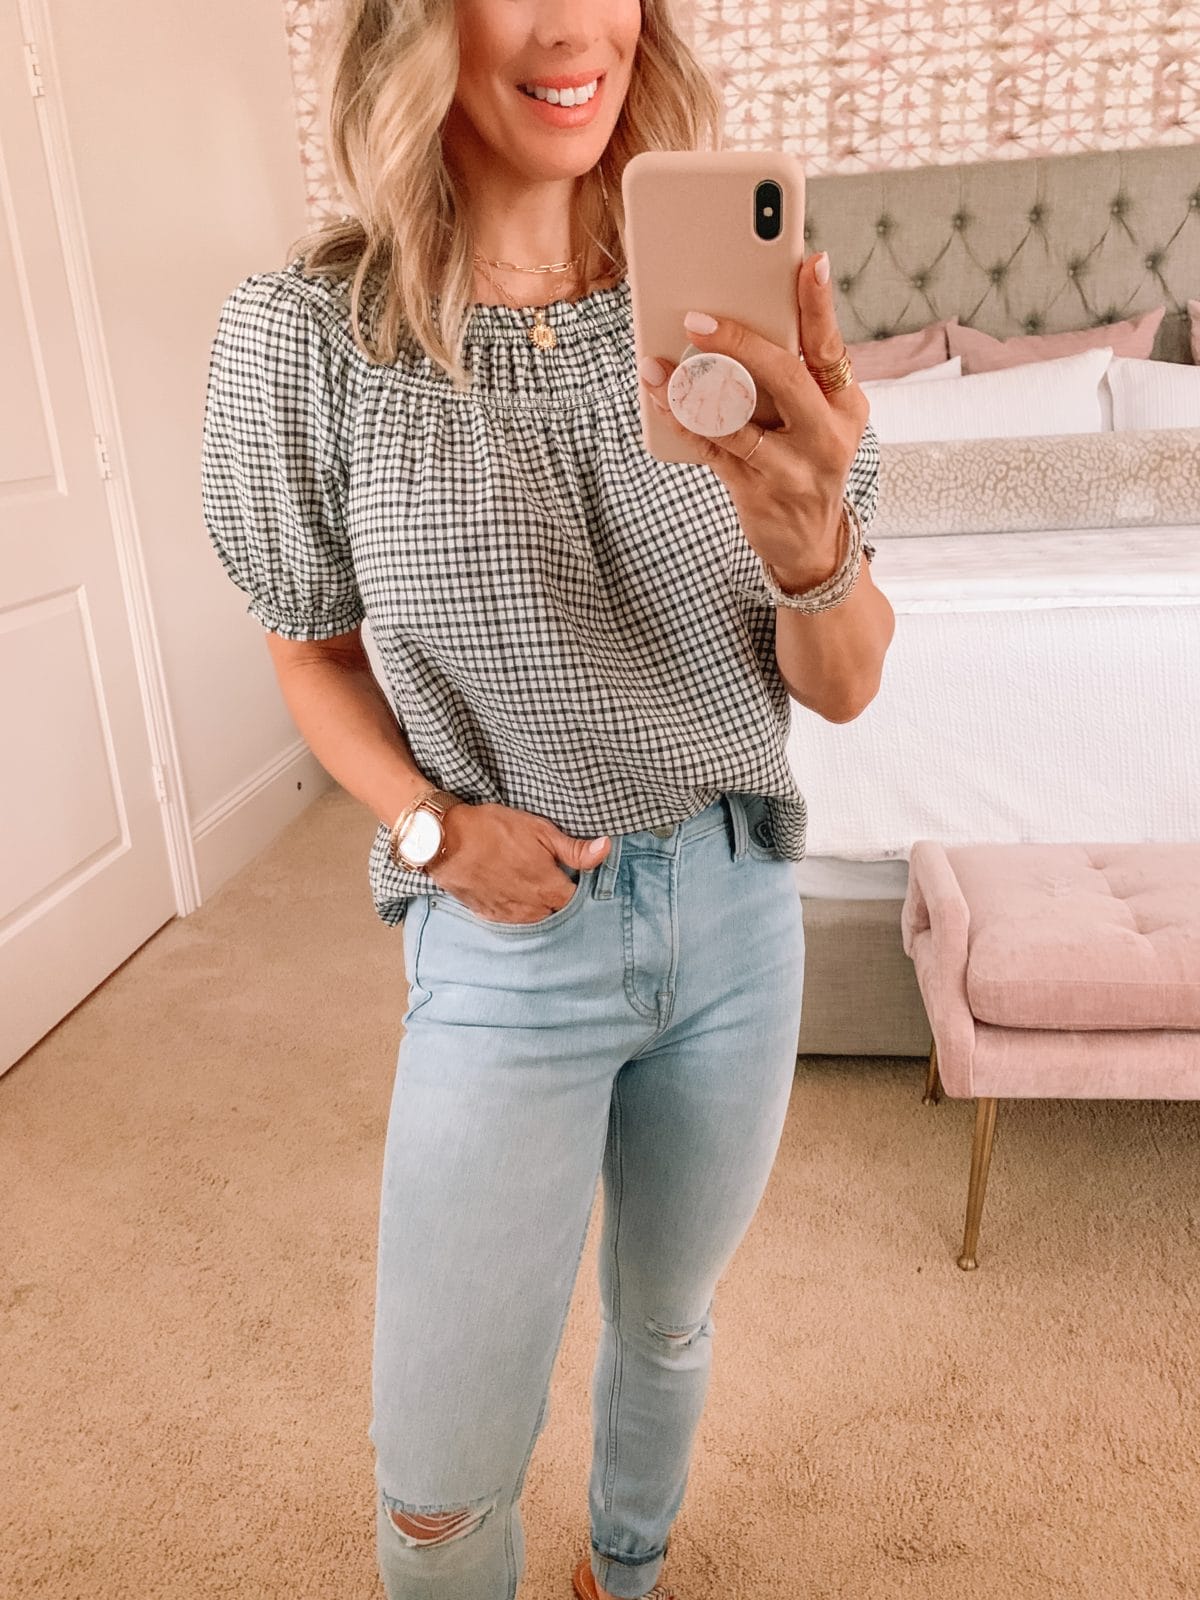 Walmart jeans and gingham top